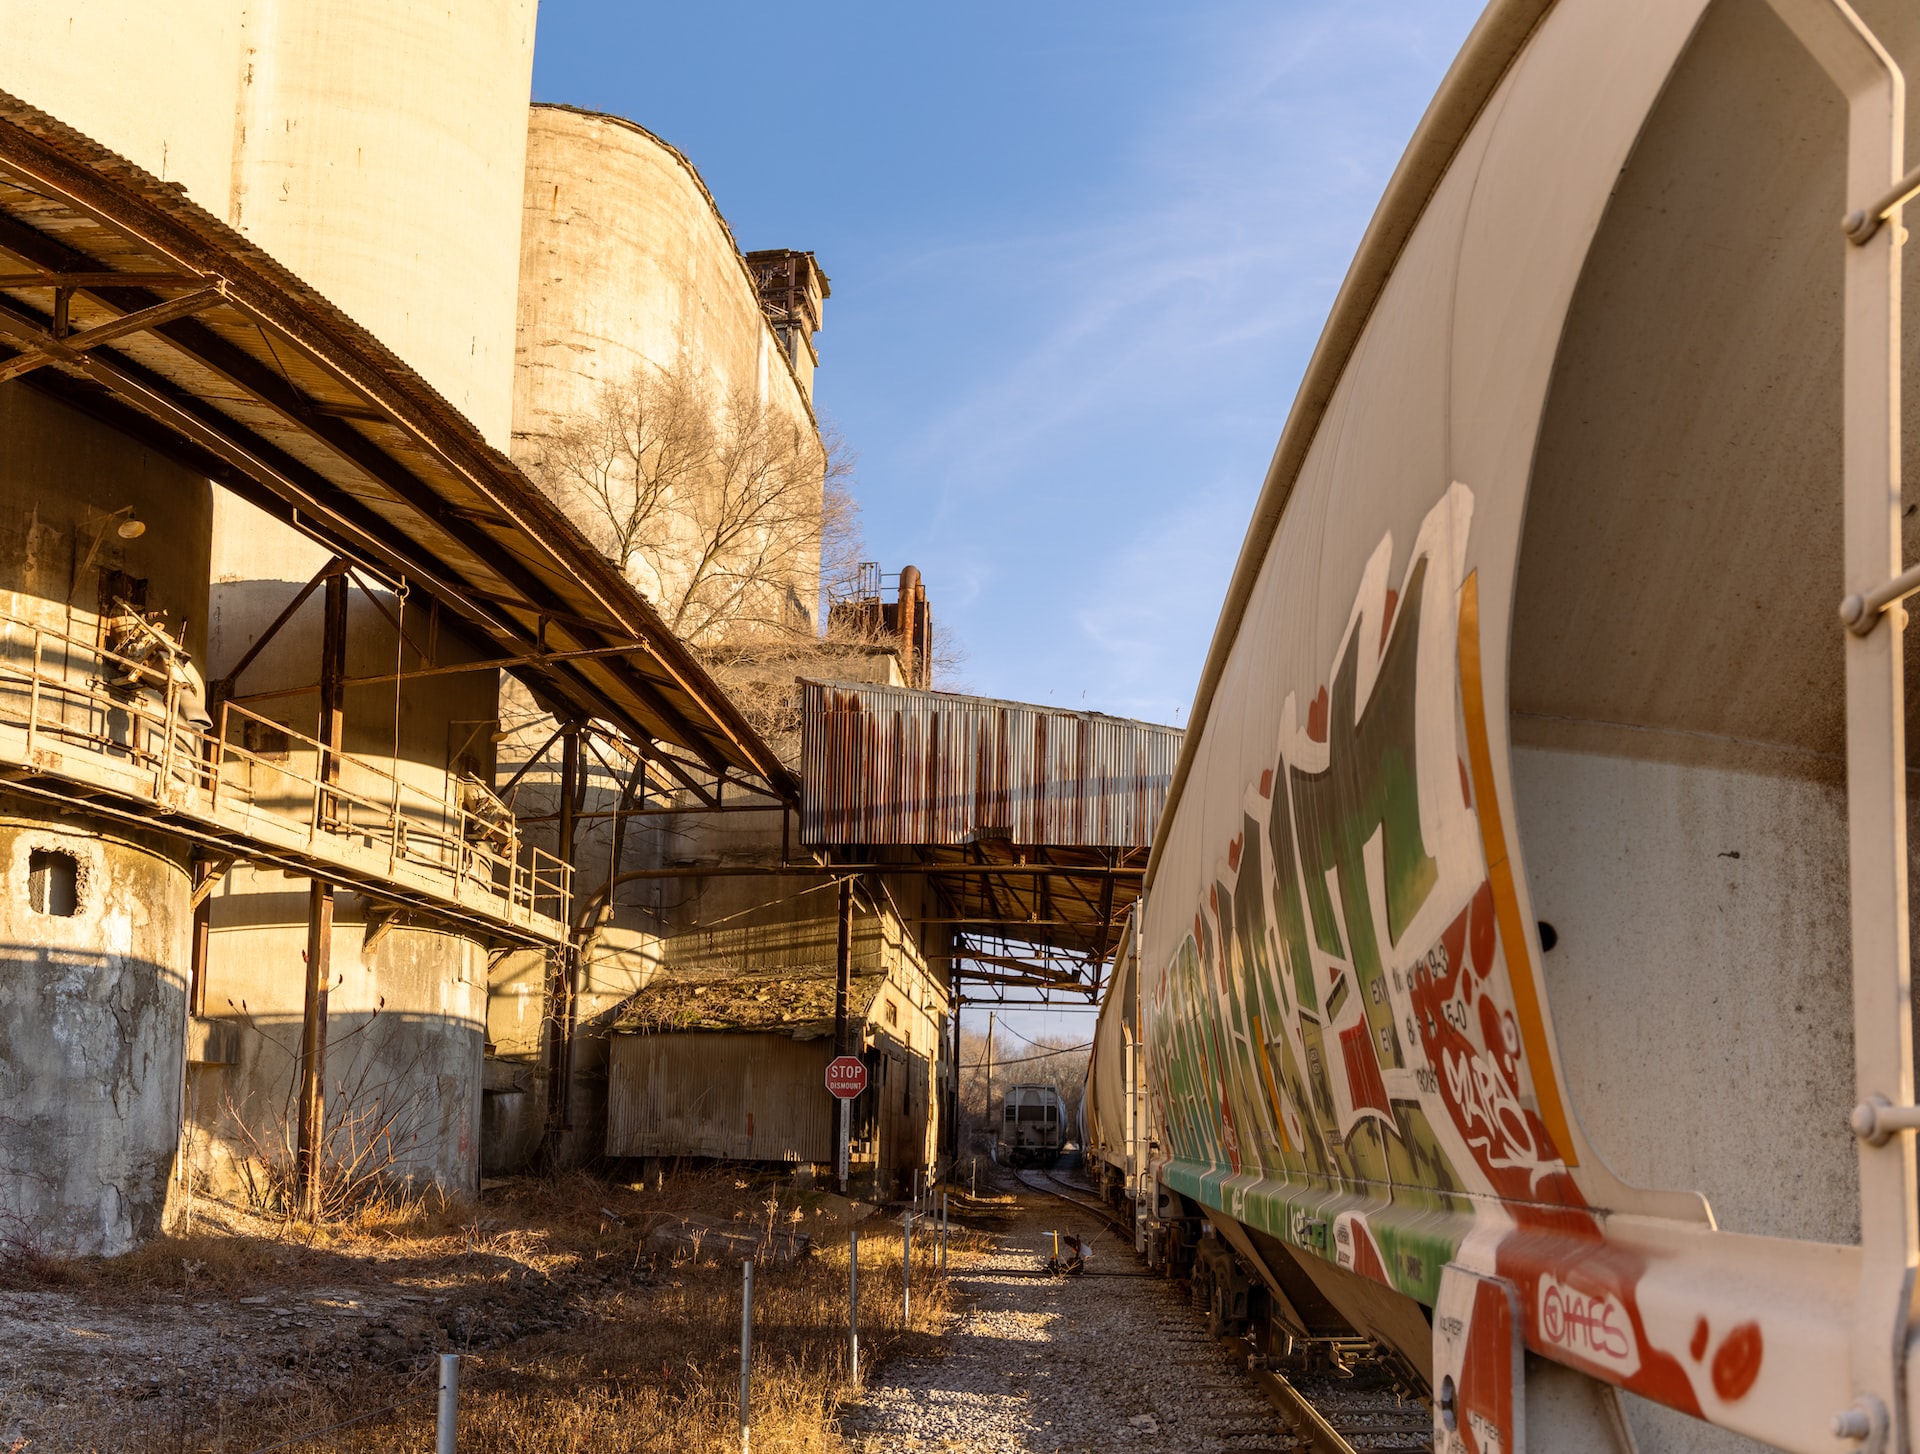 A series of train cars, covered in graffiti, sit idle on an old railway beside old concrete silos. | Veteran Car Donations